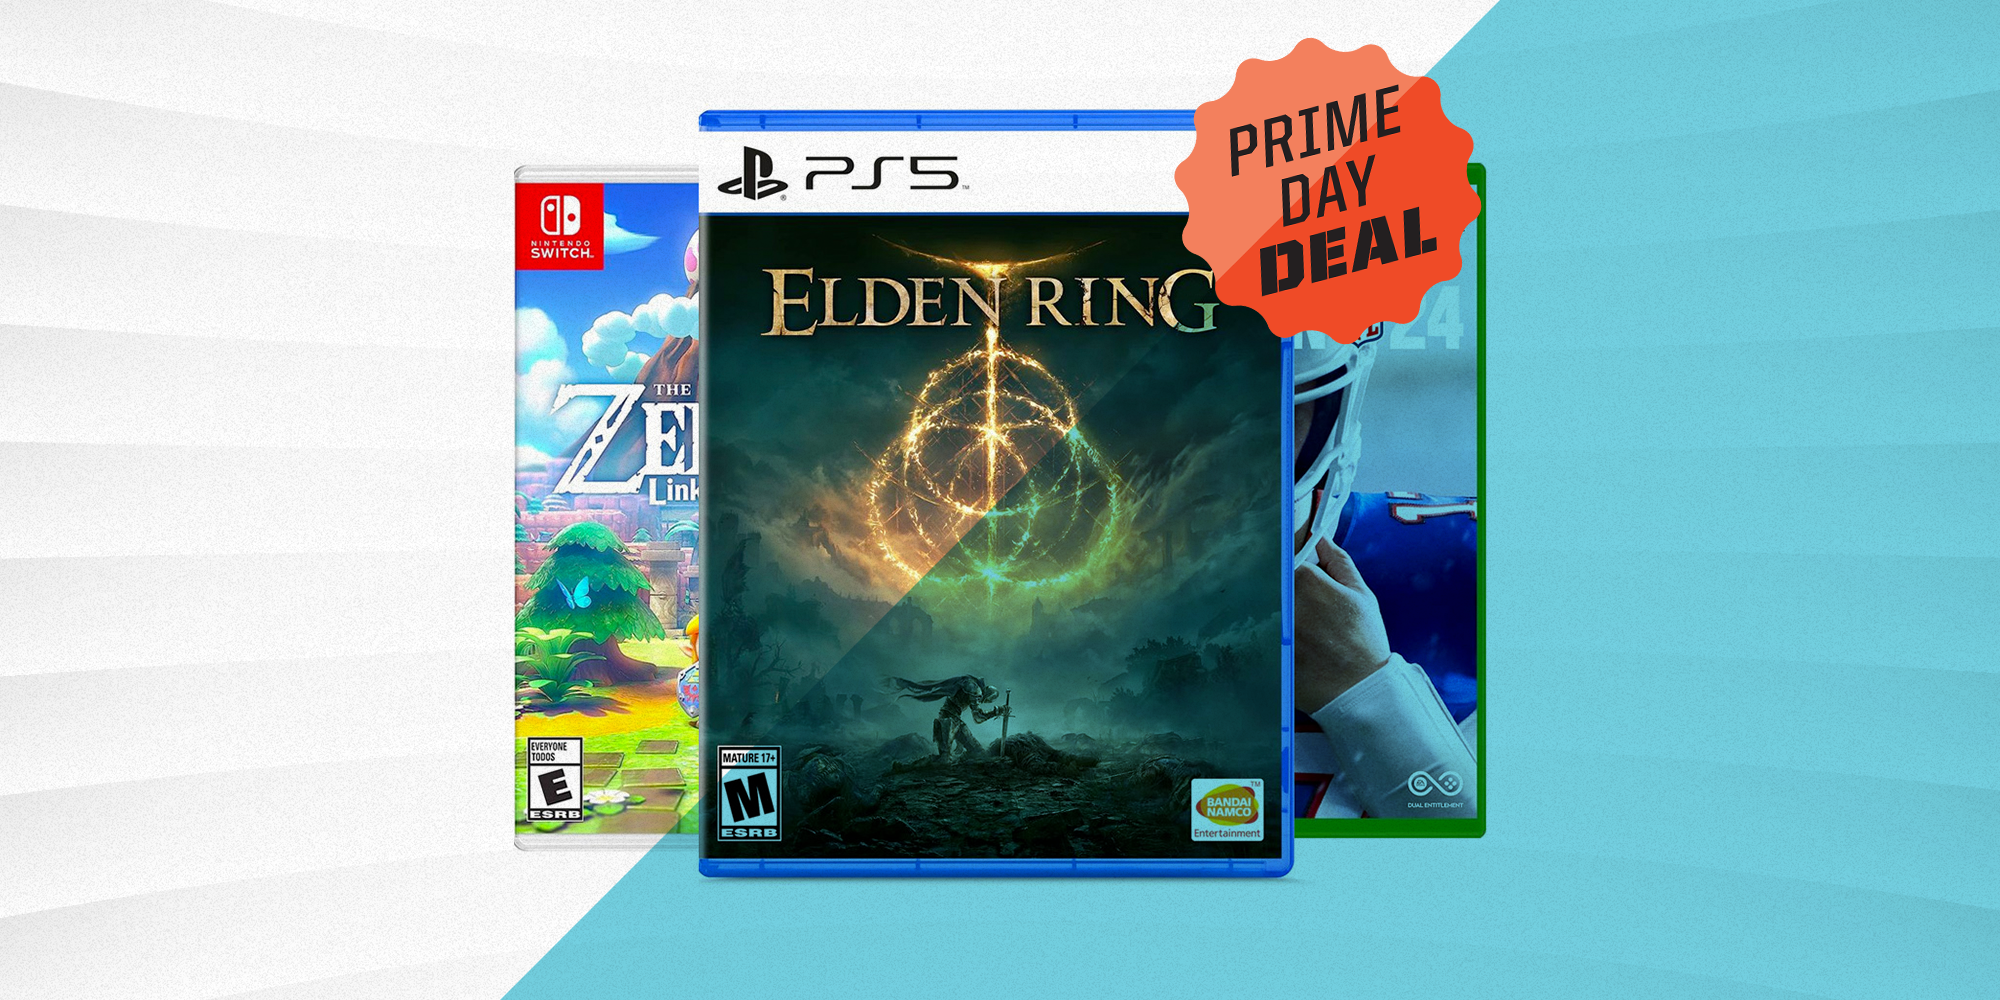 Best Prime Day Gaming Deals (July 12) - GameSpot